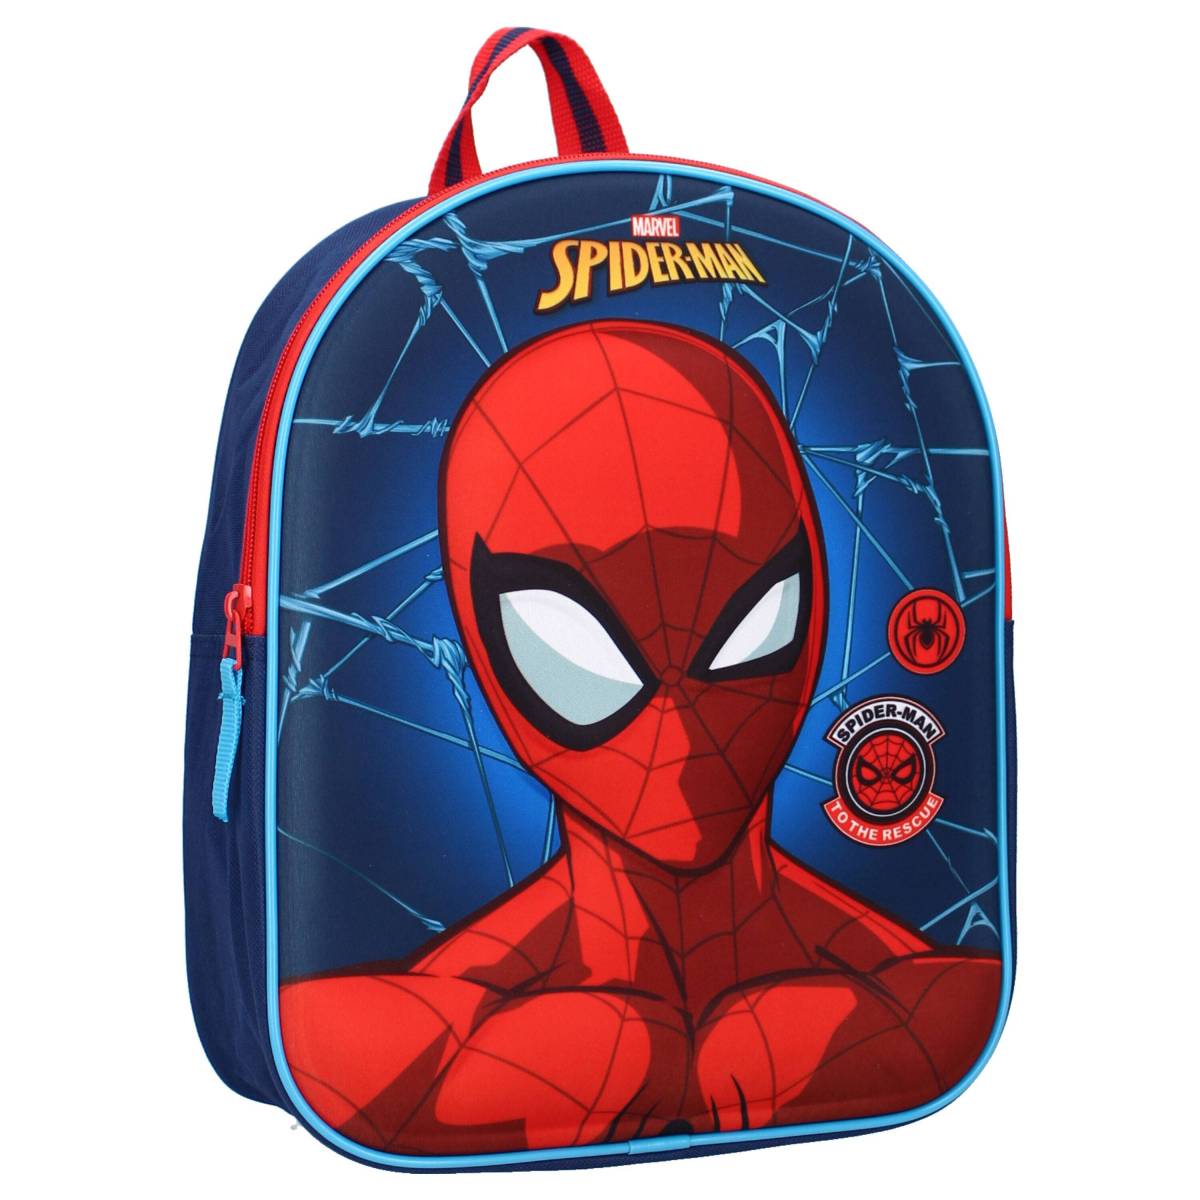 Disney Loungefly Backpack - Spider-Man